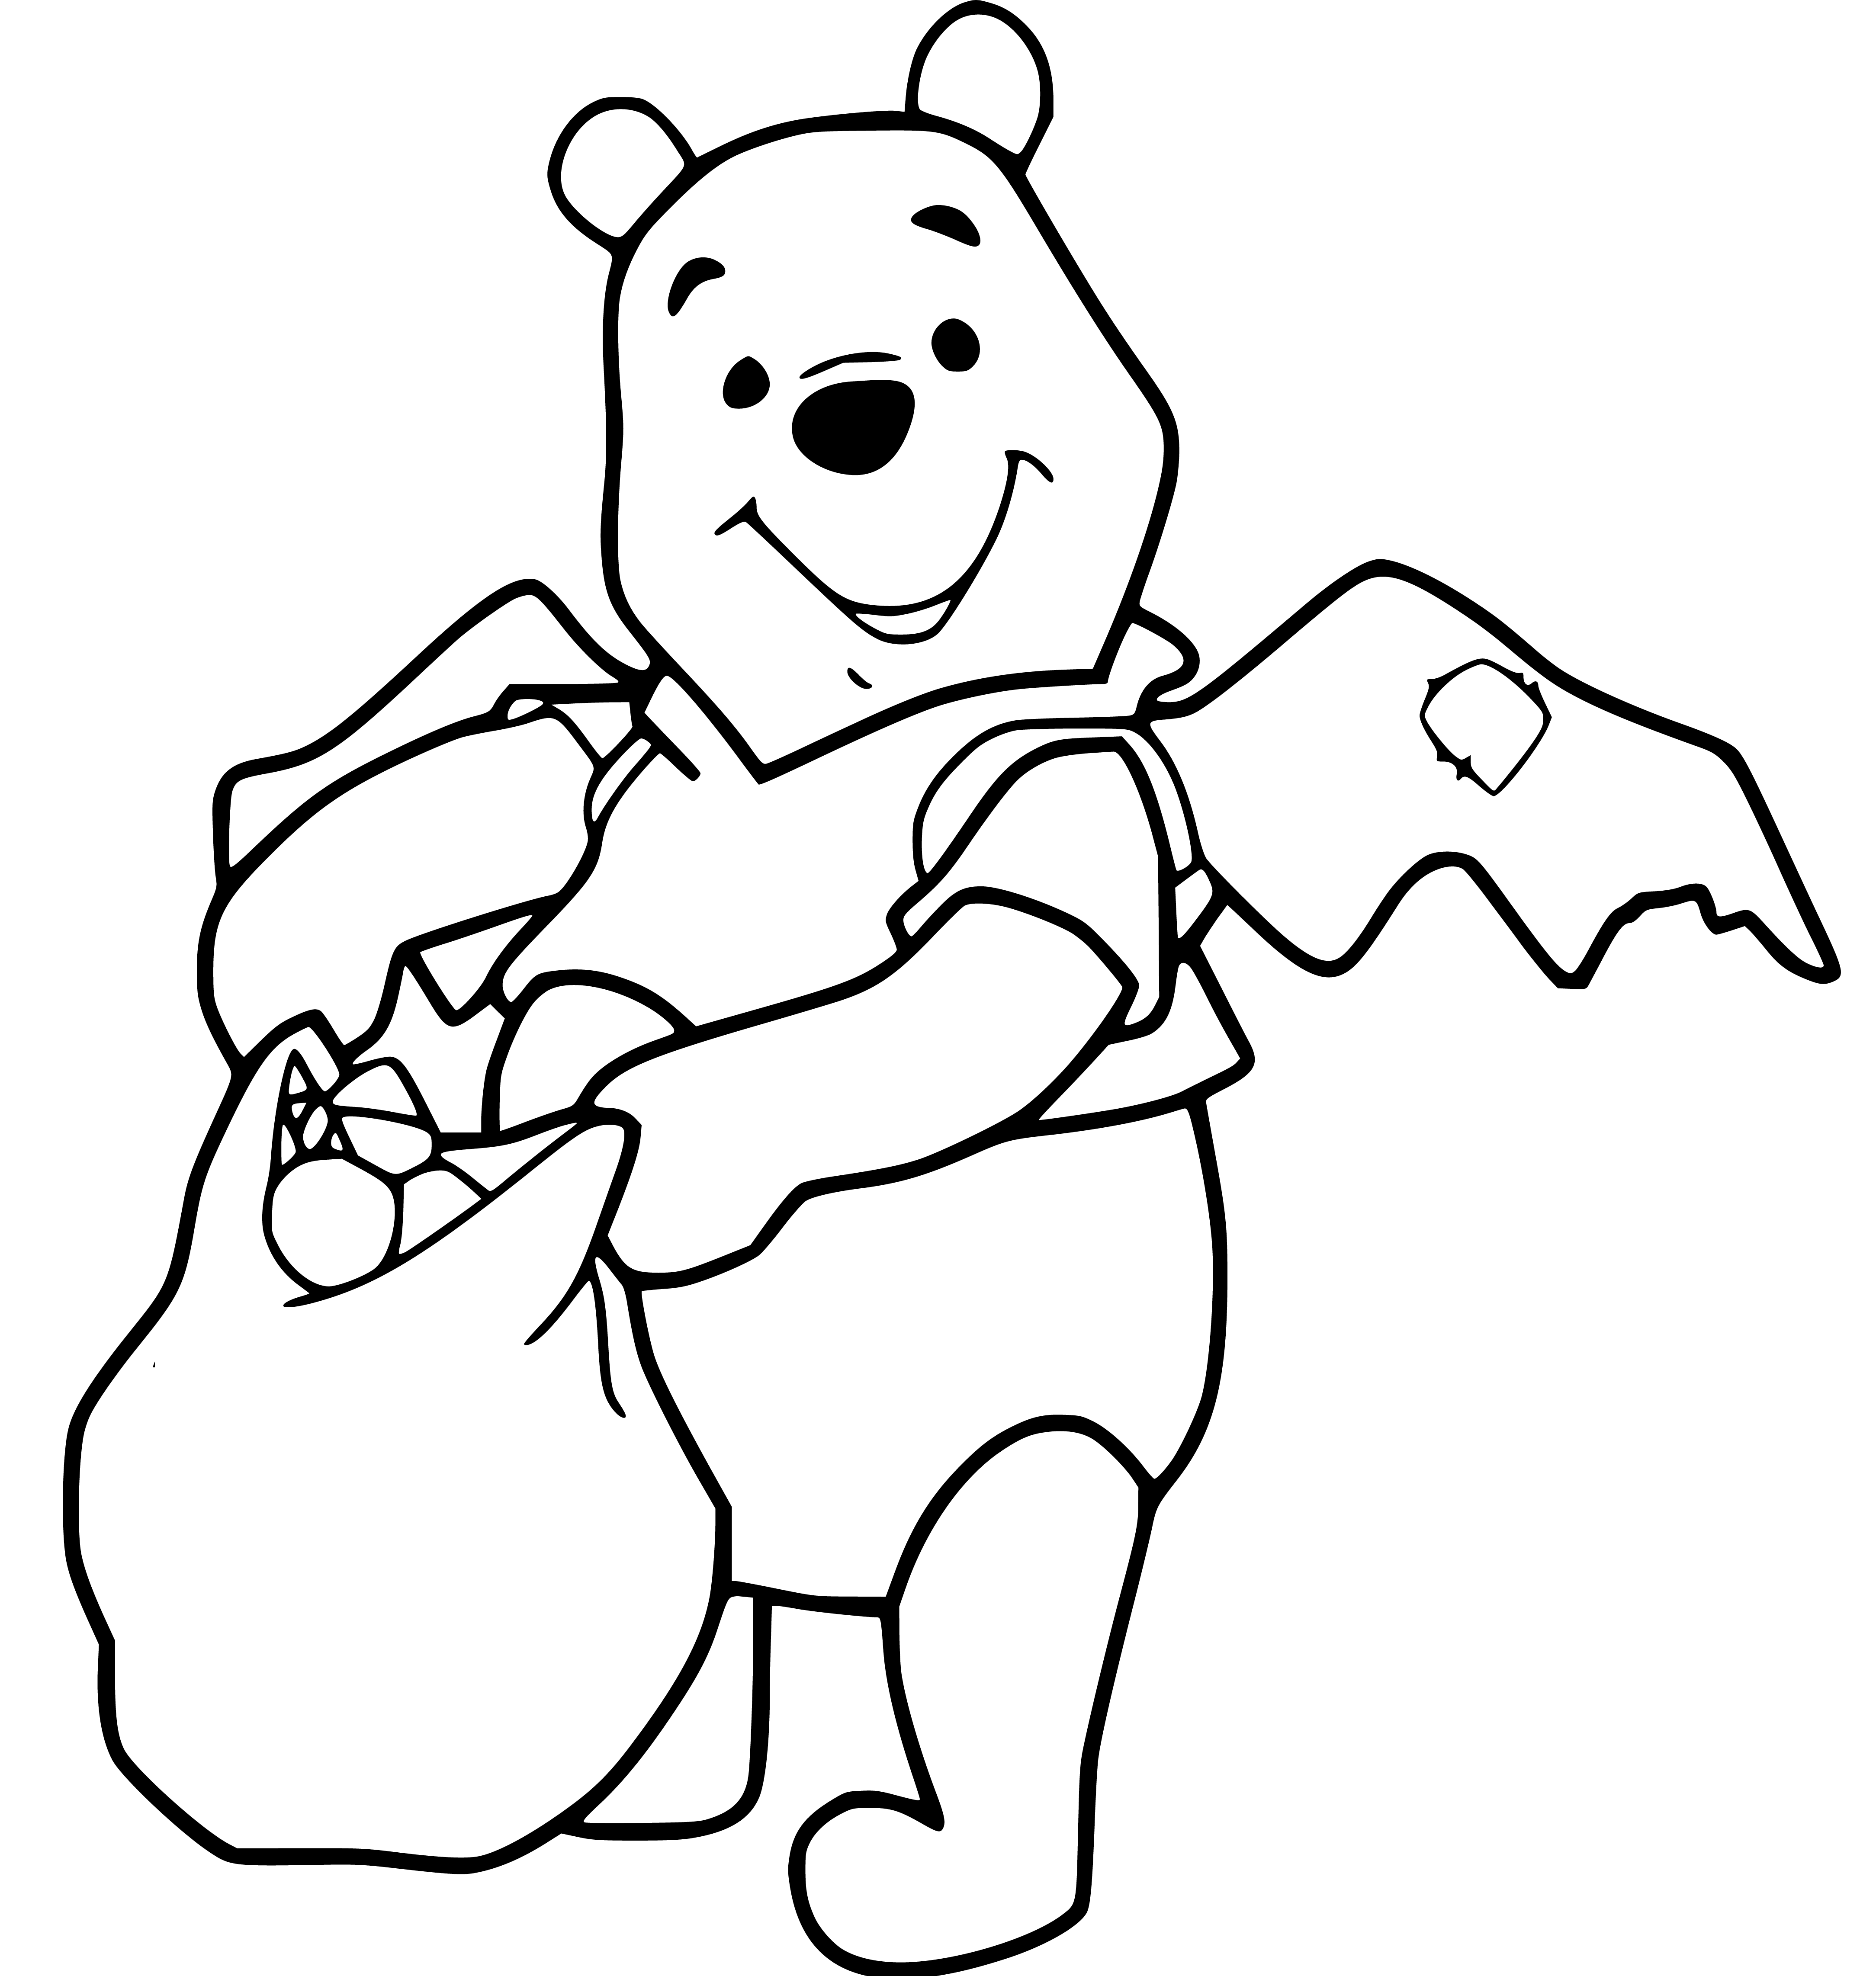 Printable Winnie the Pooh Easter Coloring Page for kids.